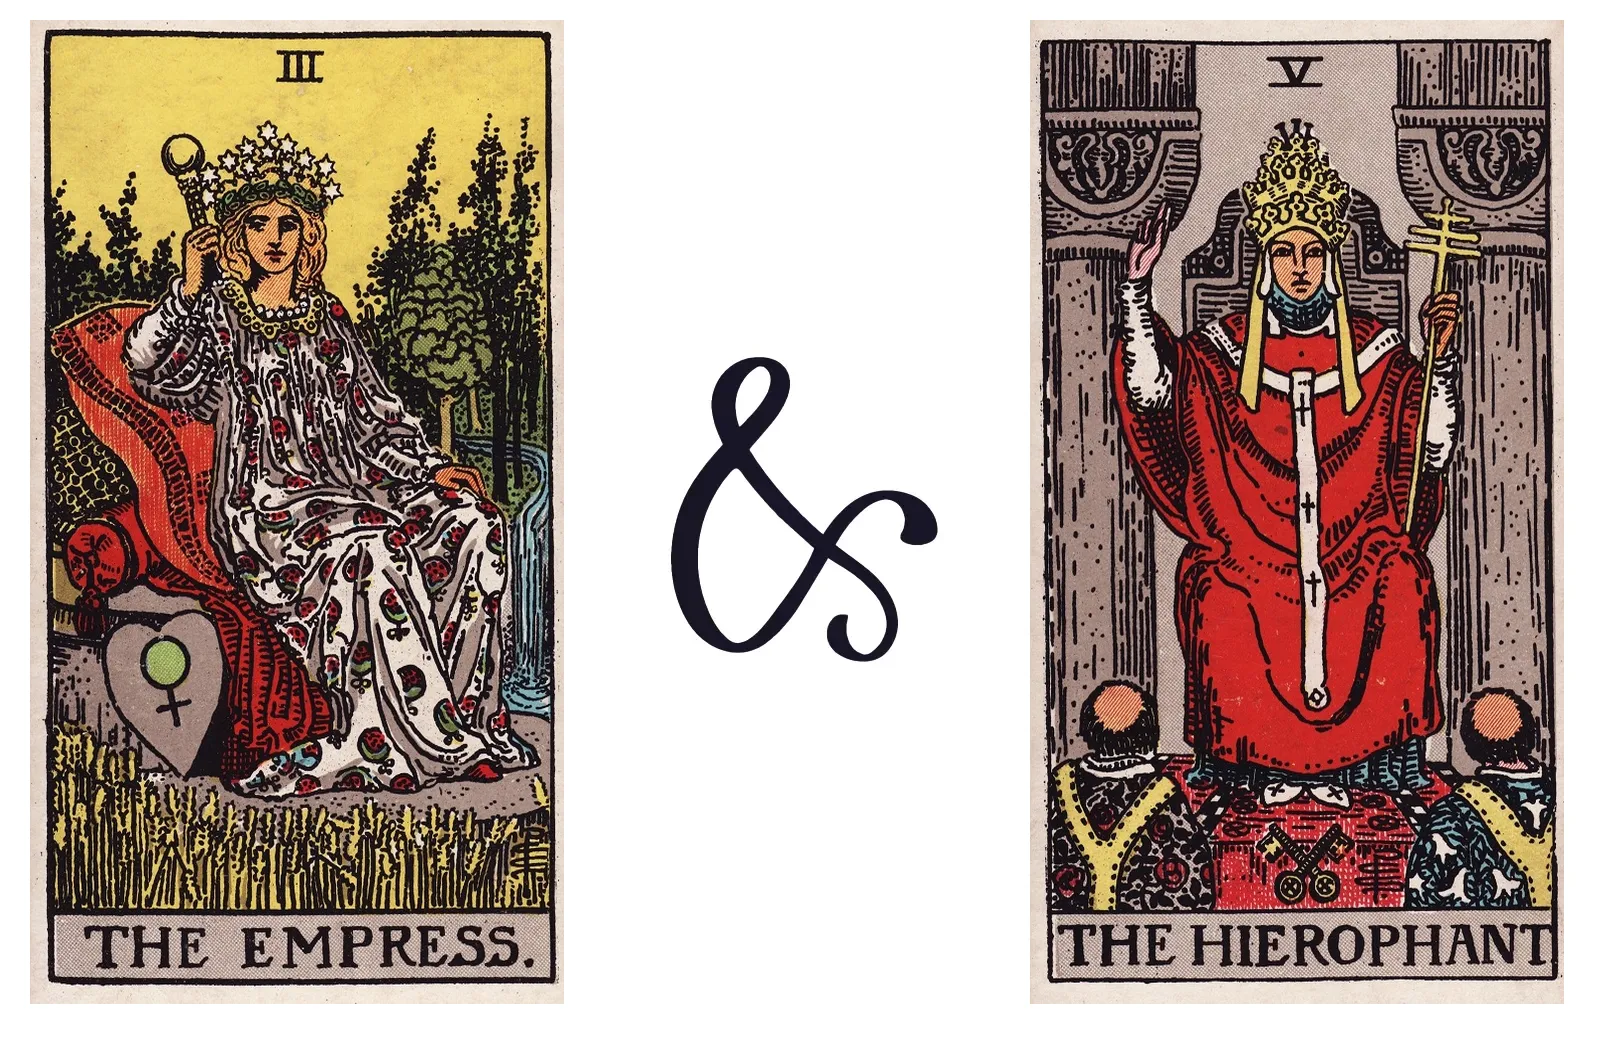 The Empress and The Hierophant